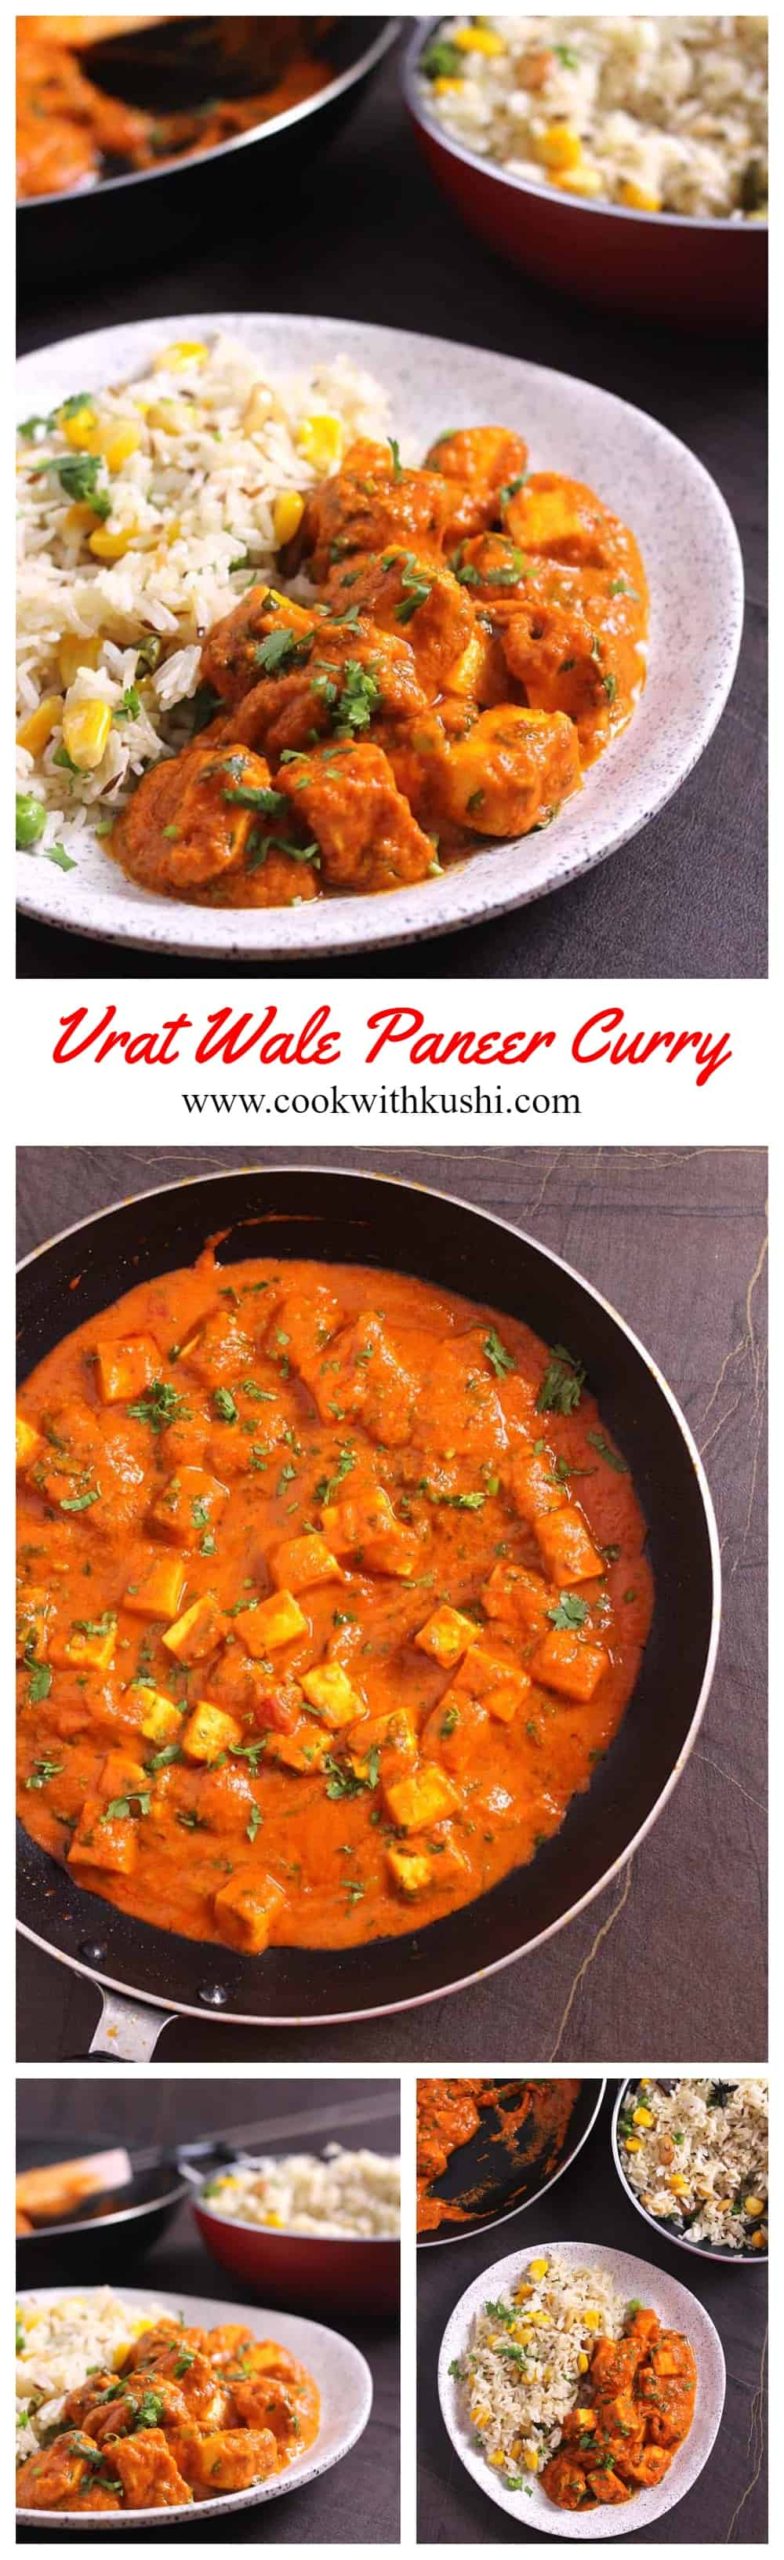 Vrat wale paneer curry or paneer masala is super easy to make yet delicious paneer recipe prepared using a handful of essential ingredients from your kitchen. #paneer #vrat #navratri #fasting #upvas